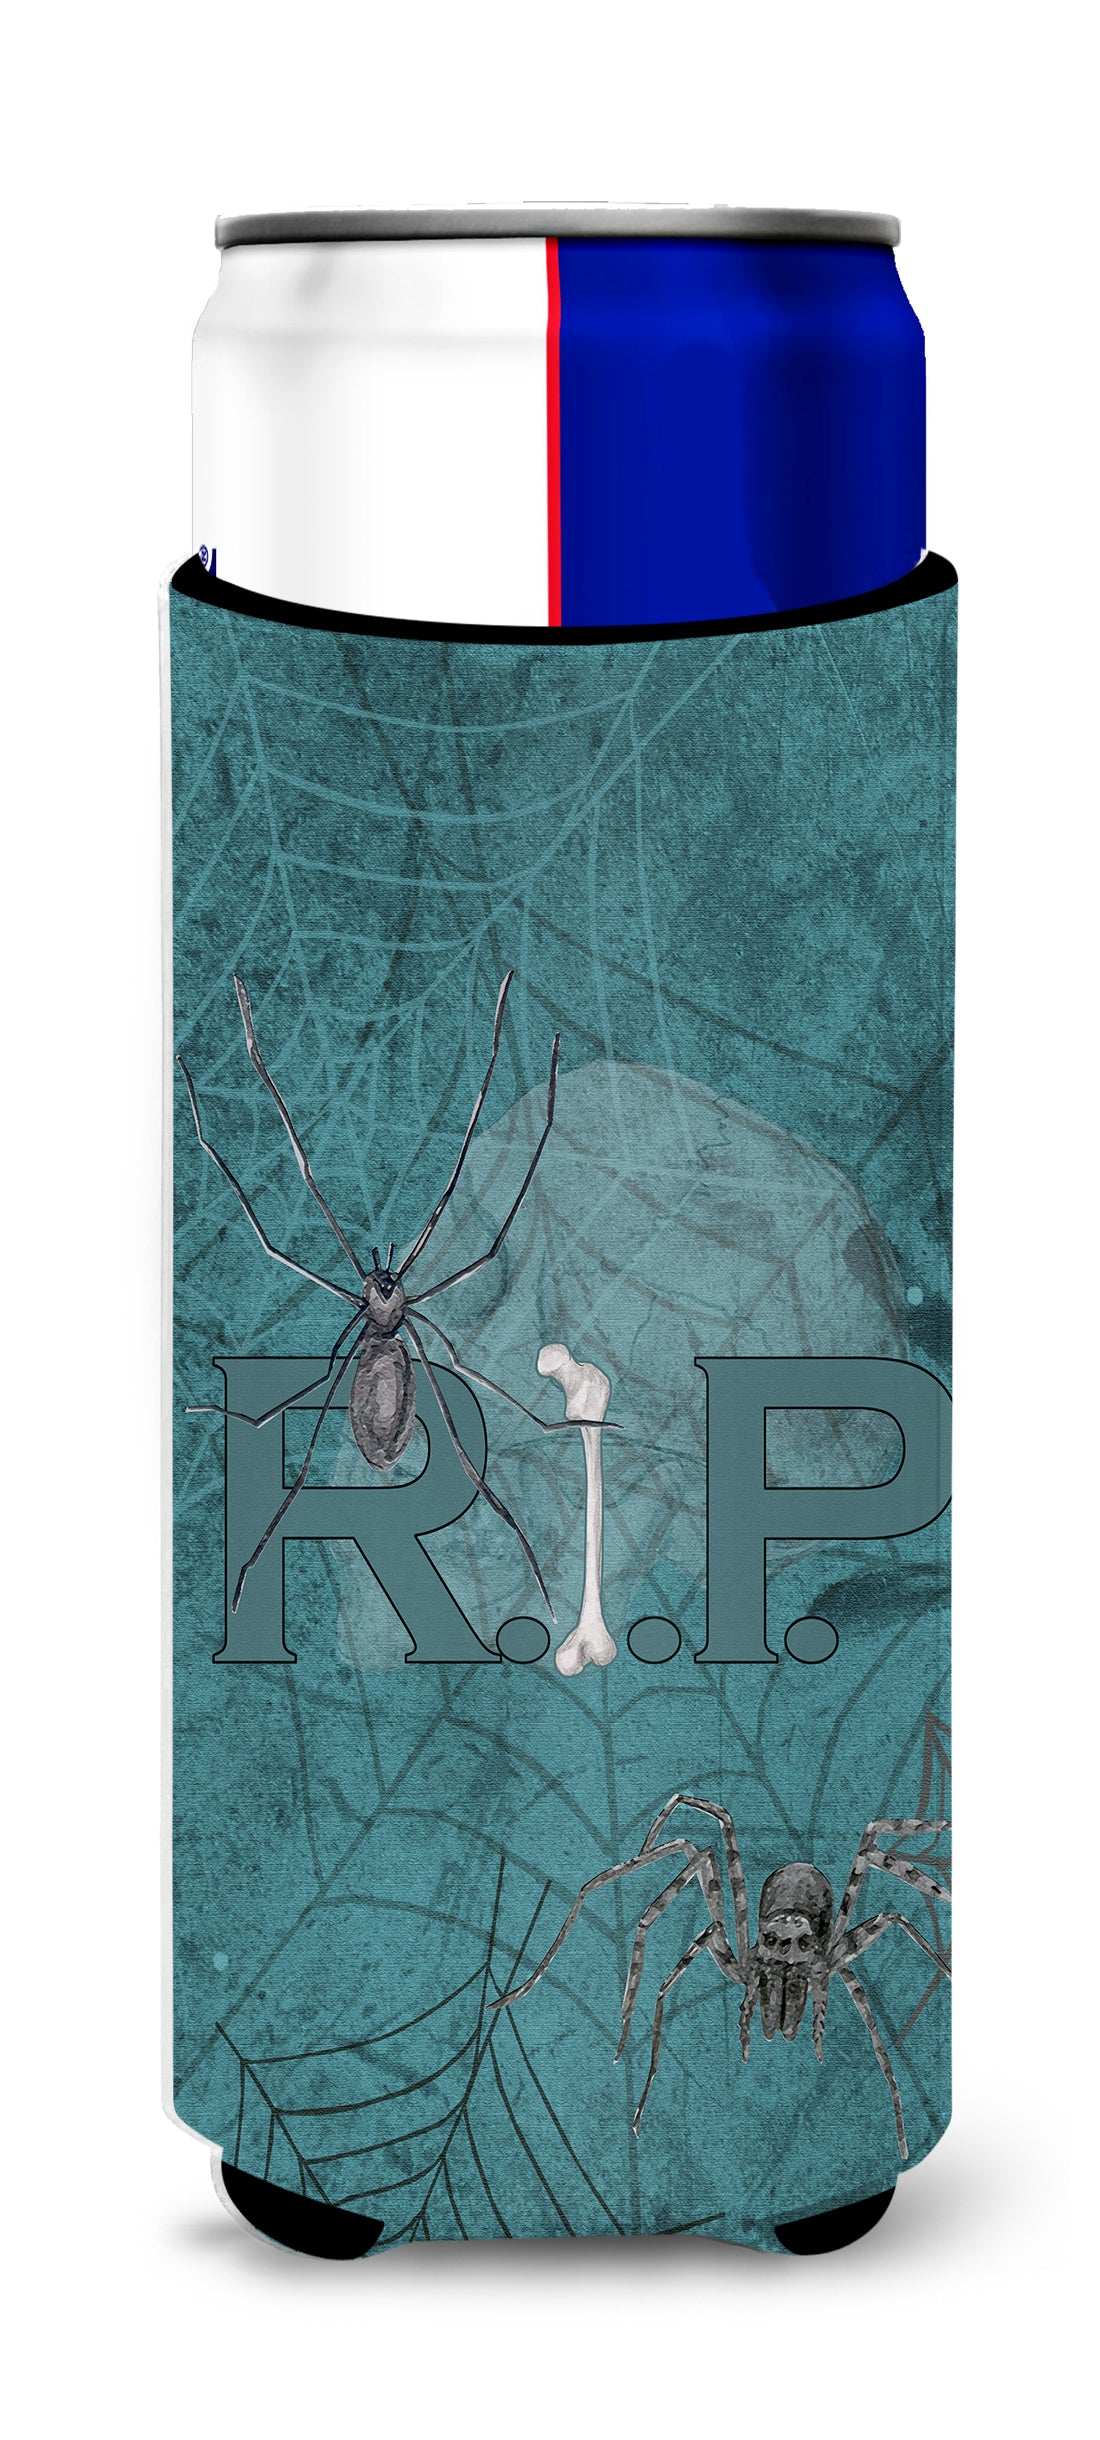 RIP Rest in Peace with spider web Halloween Ultra Beverage Insulators for slim cans SB3004MUK.